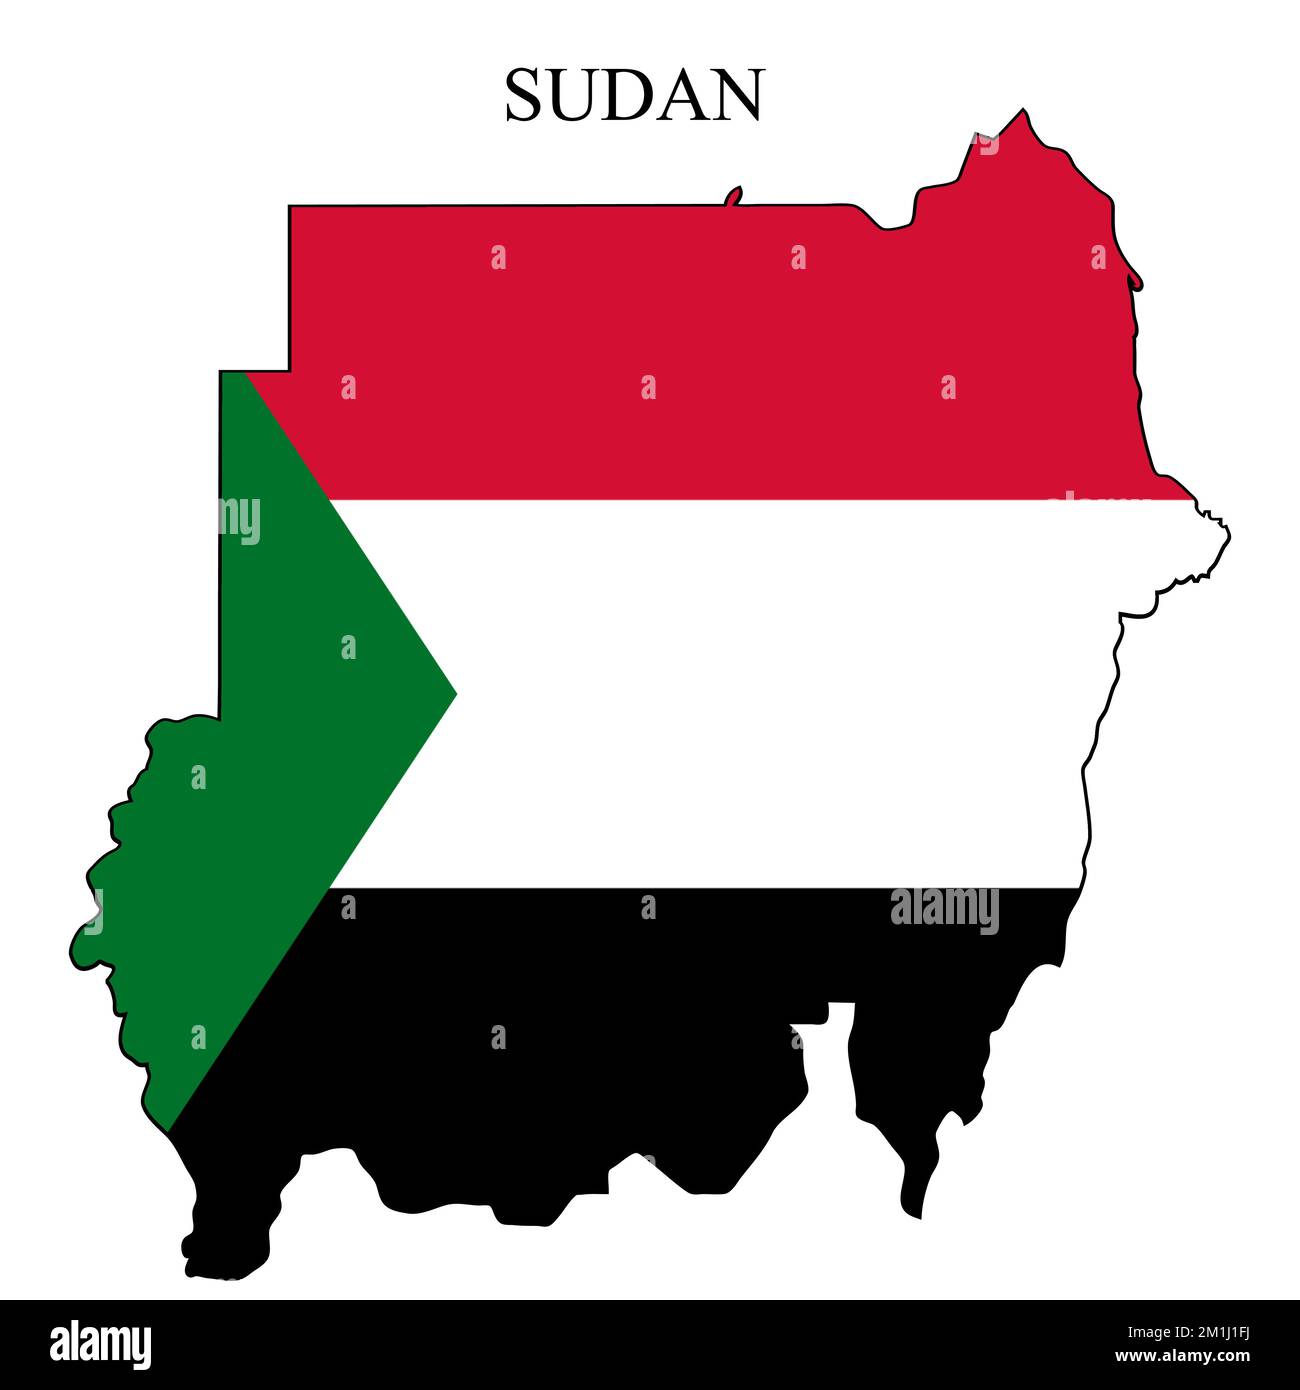 Sudan map vector illustration. Global economy. Famous country. Northern ...